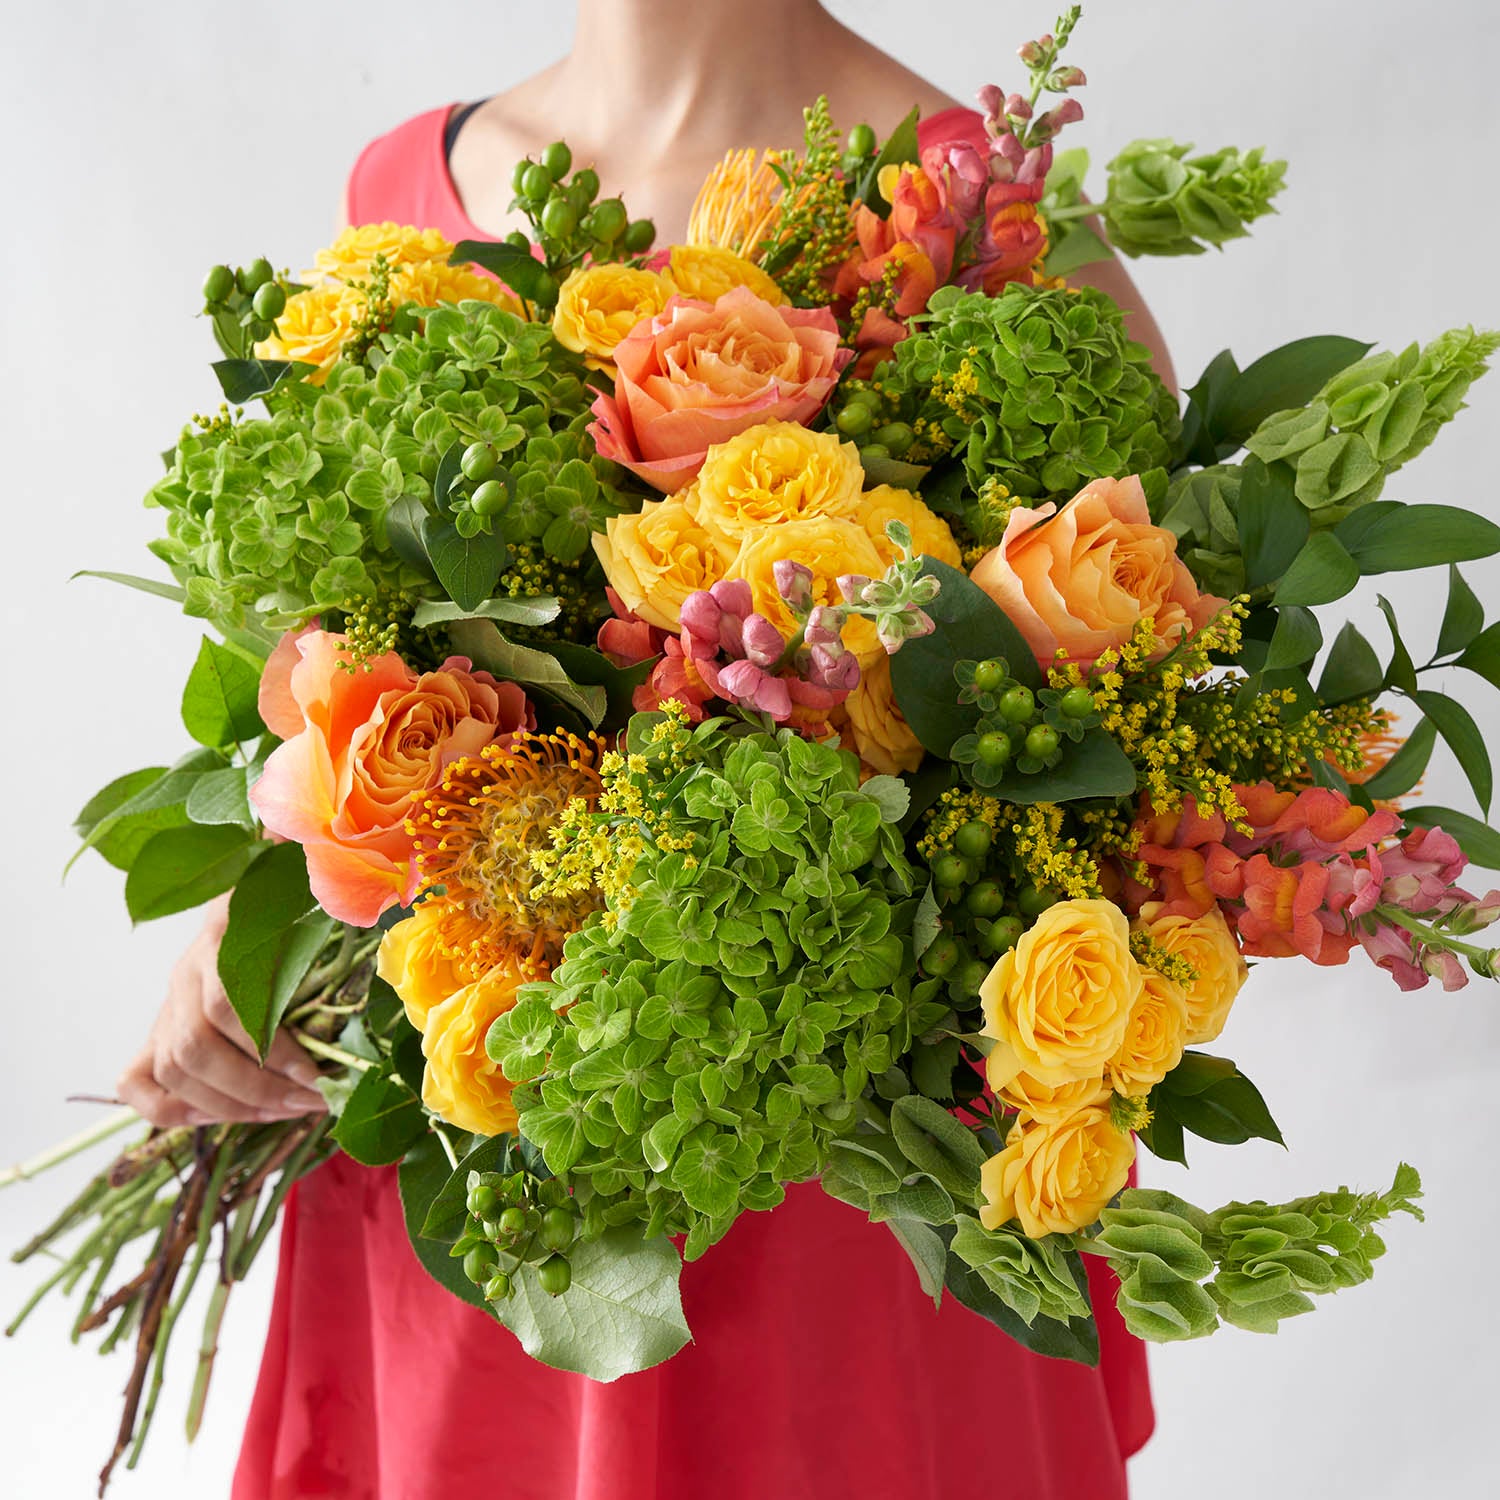 Woman in red dress holding large bouquet of lime green, yellow, and orange flowers.